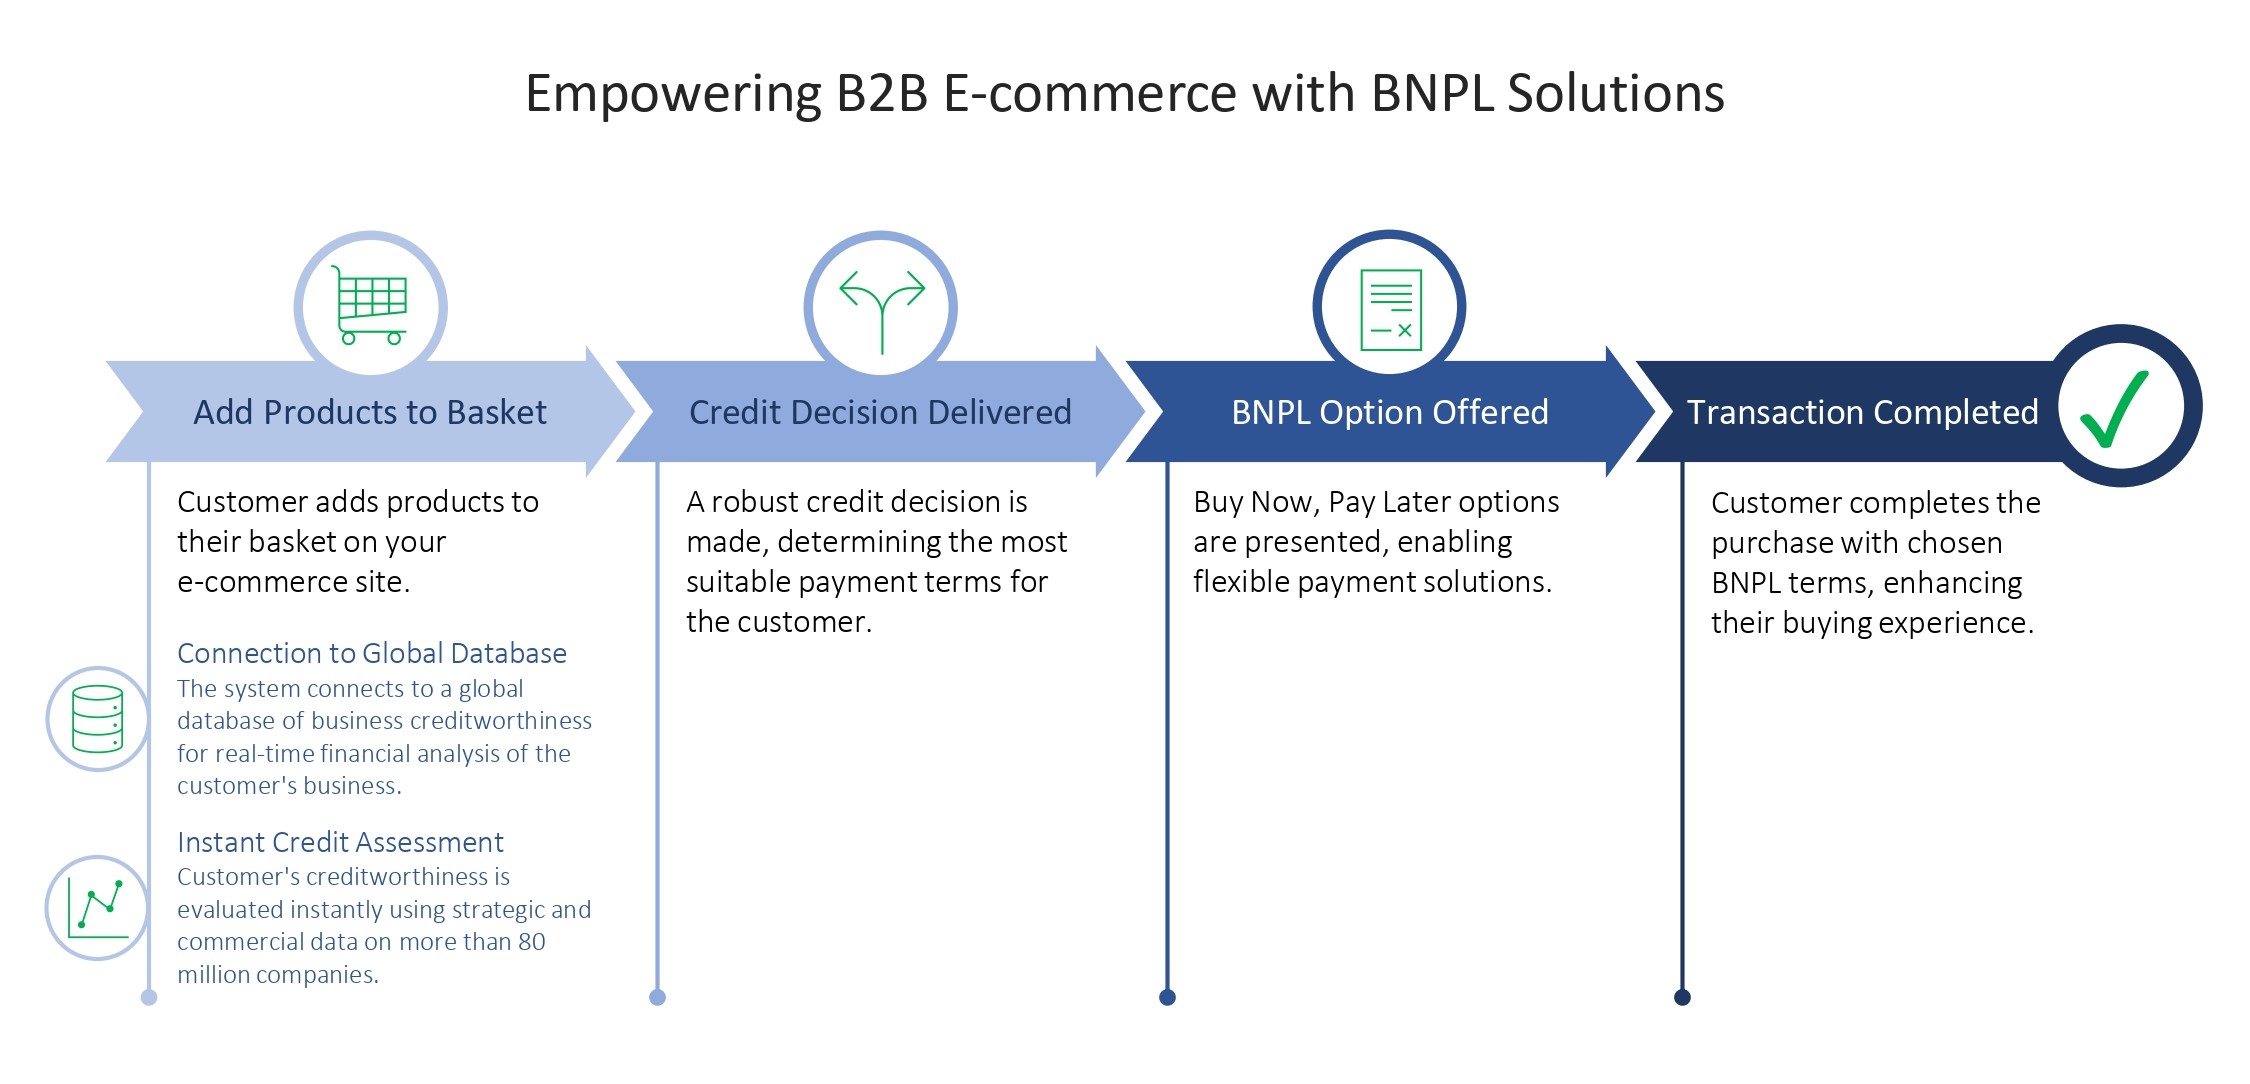  Empowering B2B e-commerce with Buy Now, Pay Later